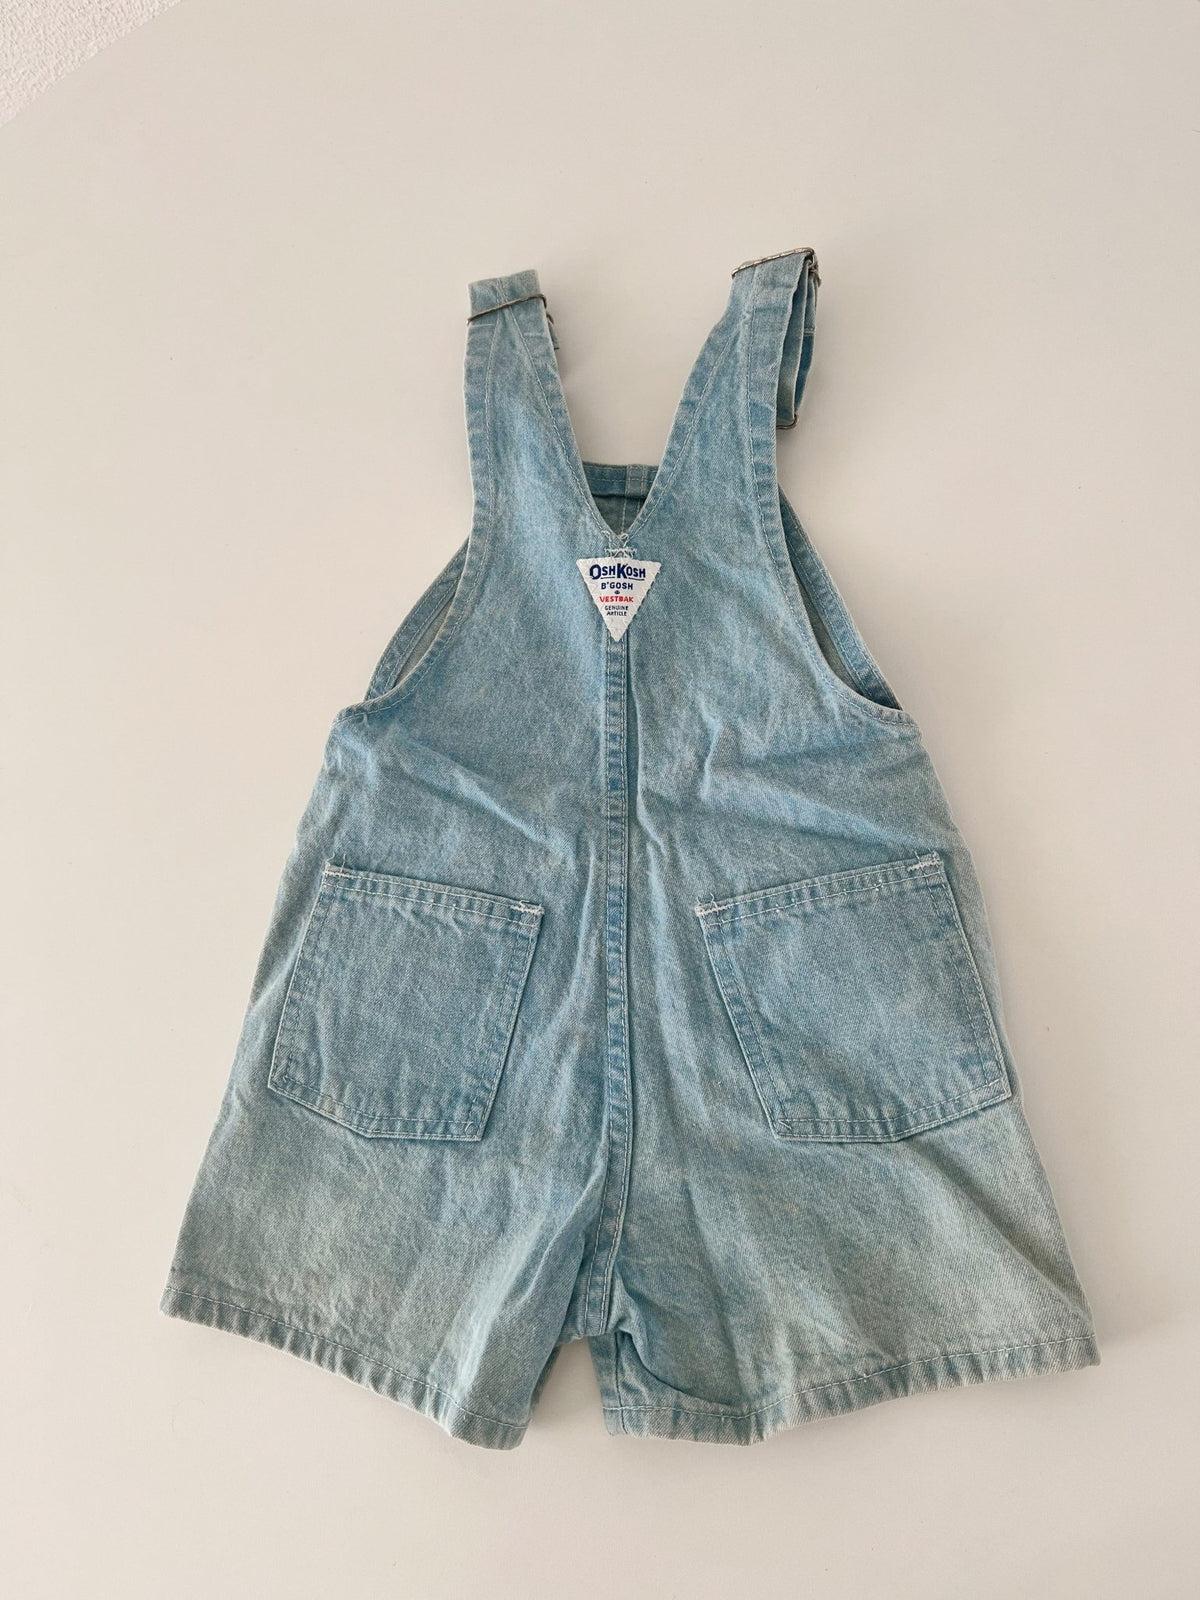 Oshkosh overall pre loved 5t - Marlow and Mae